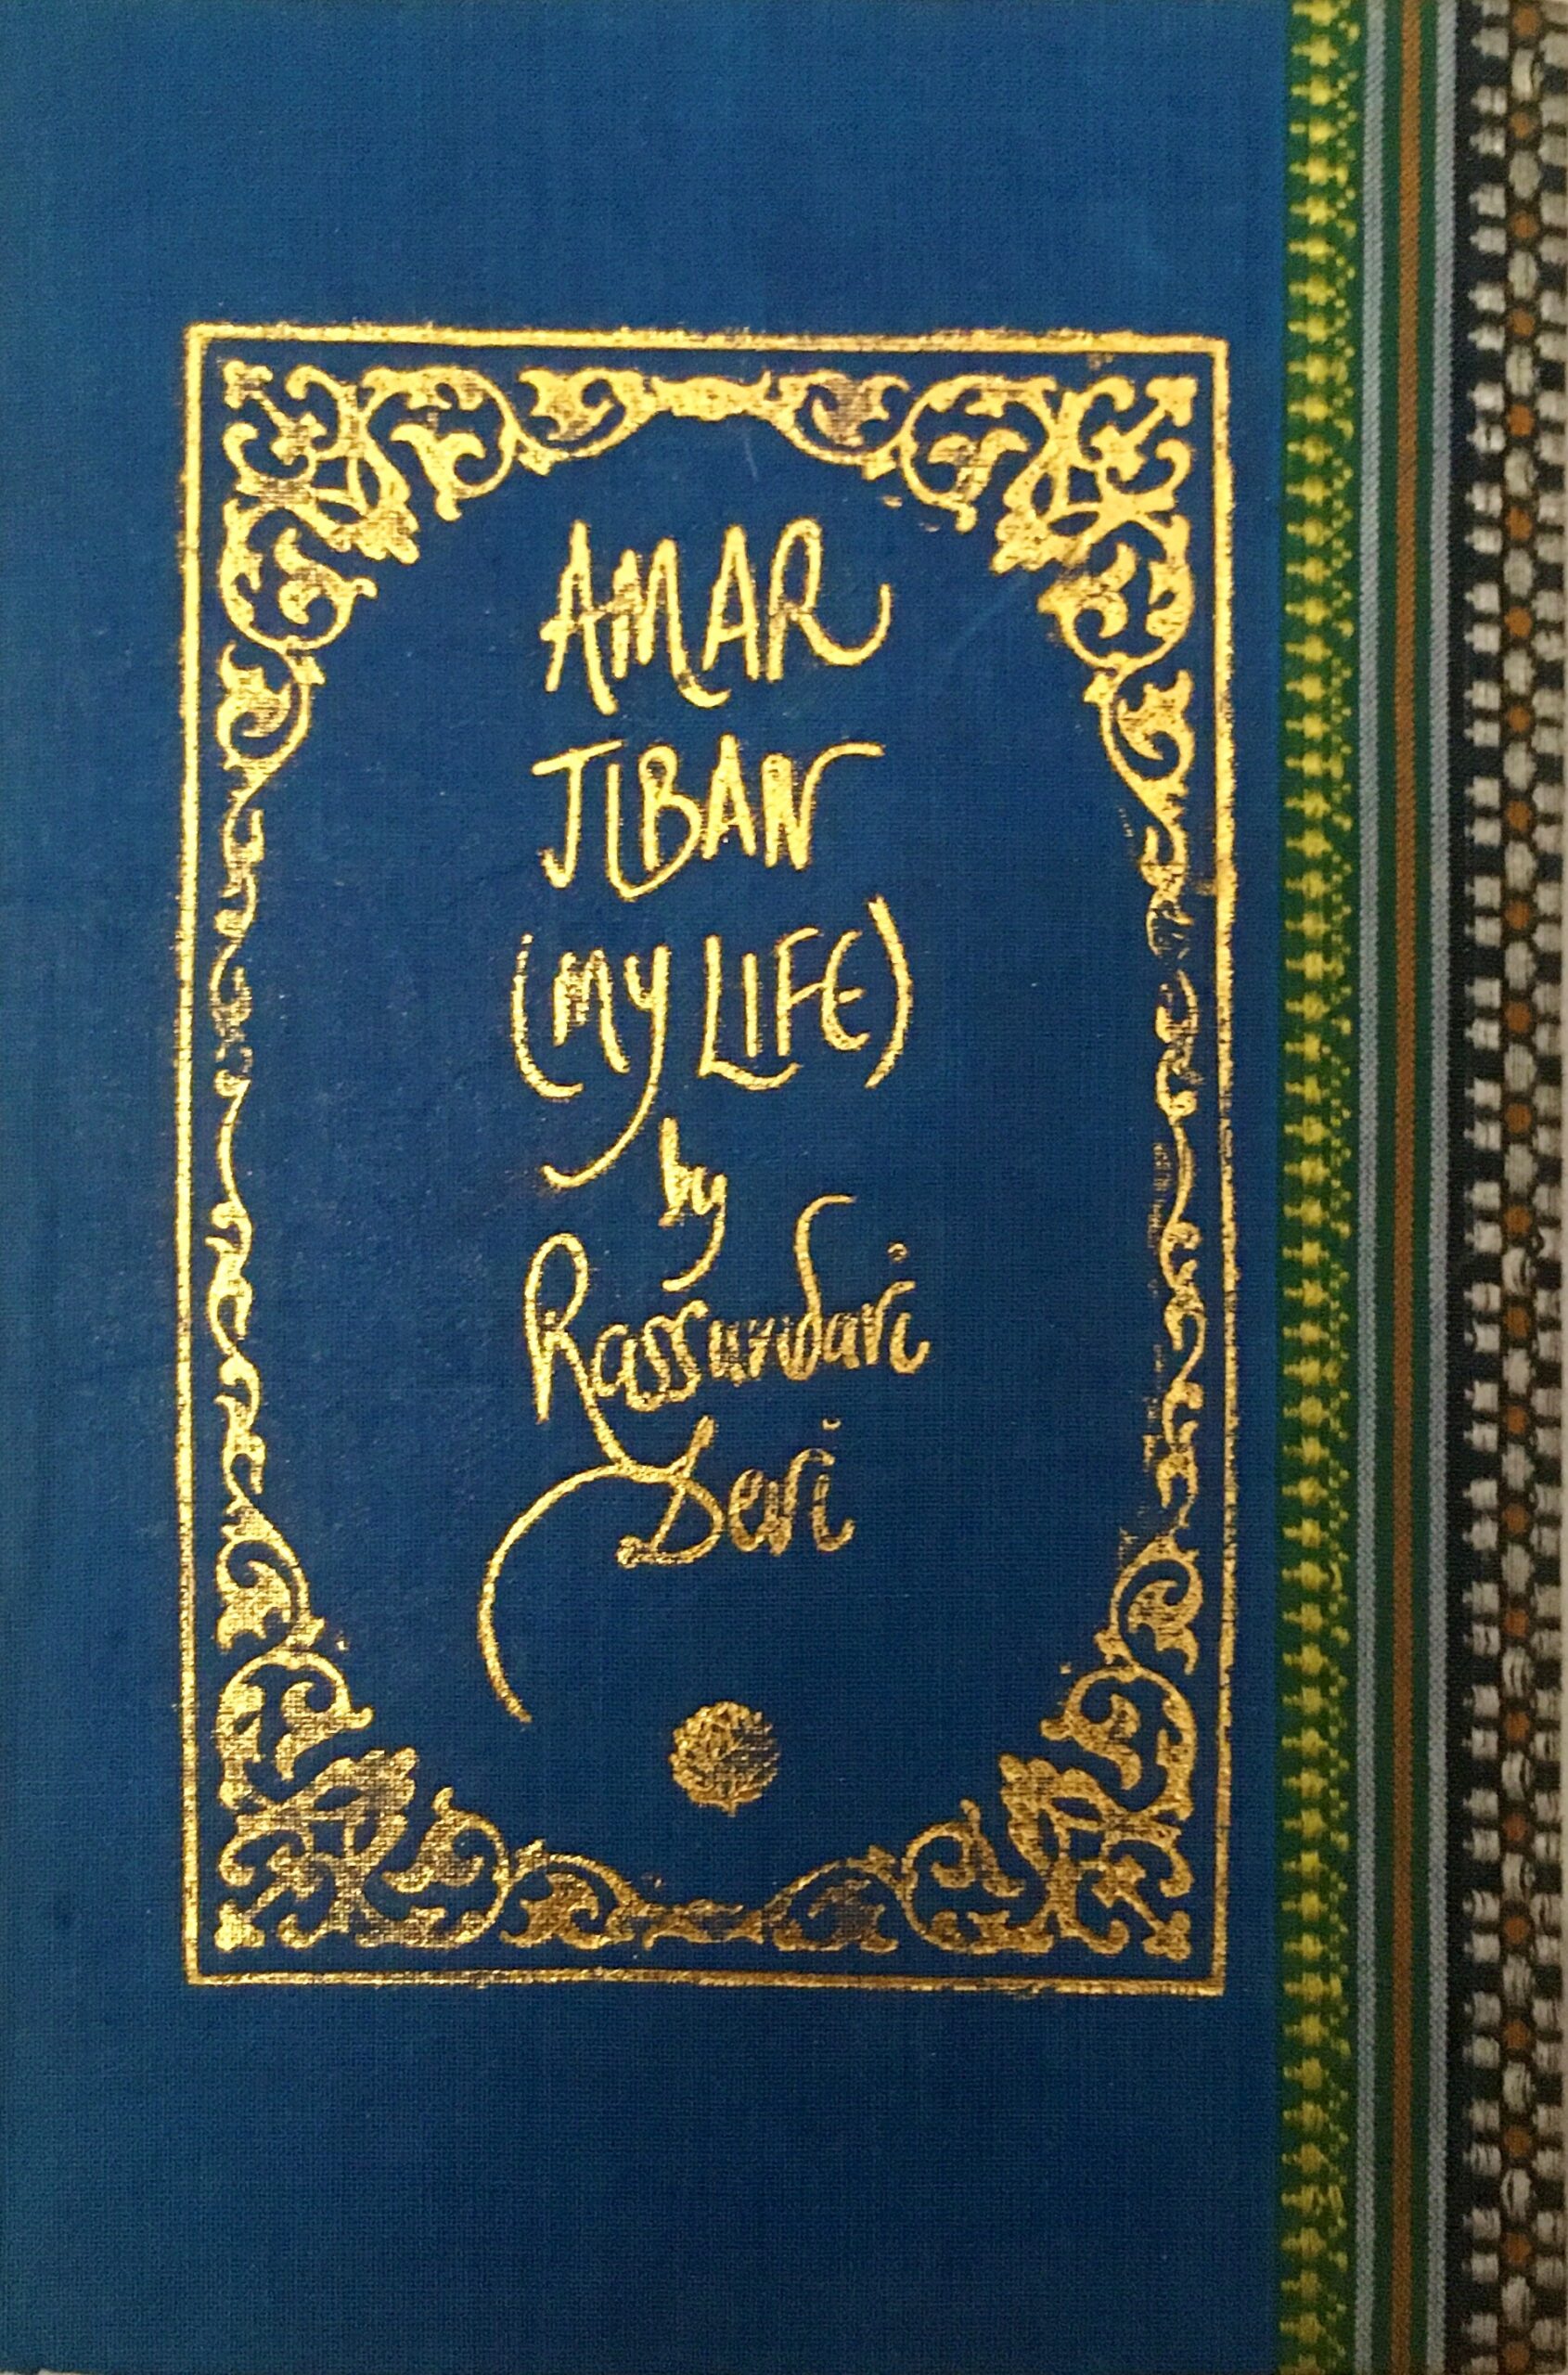 A sample cover of the book: aquamarine coloured handloom sari with gold embossed nameplate and lettering for the title and author's name. The border of the sari lines the right hand margin of the cover.